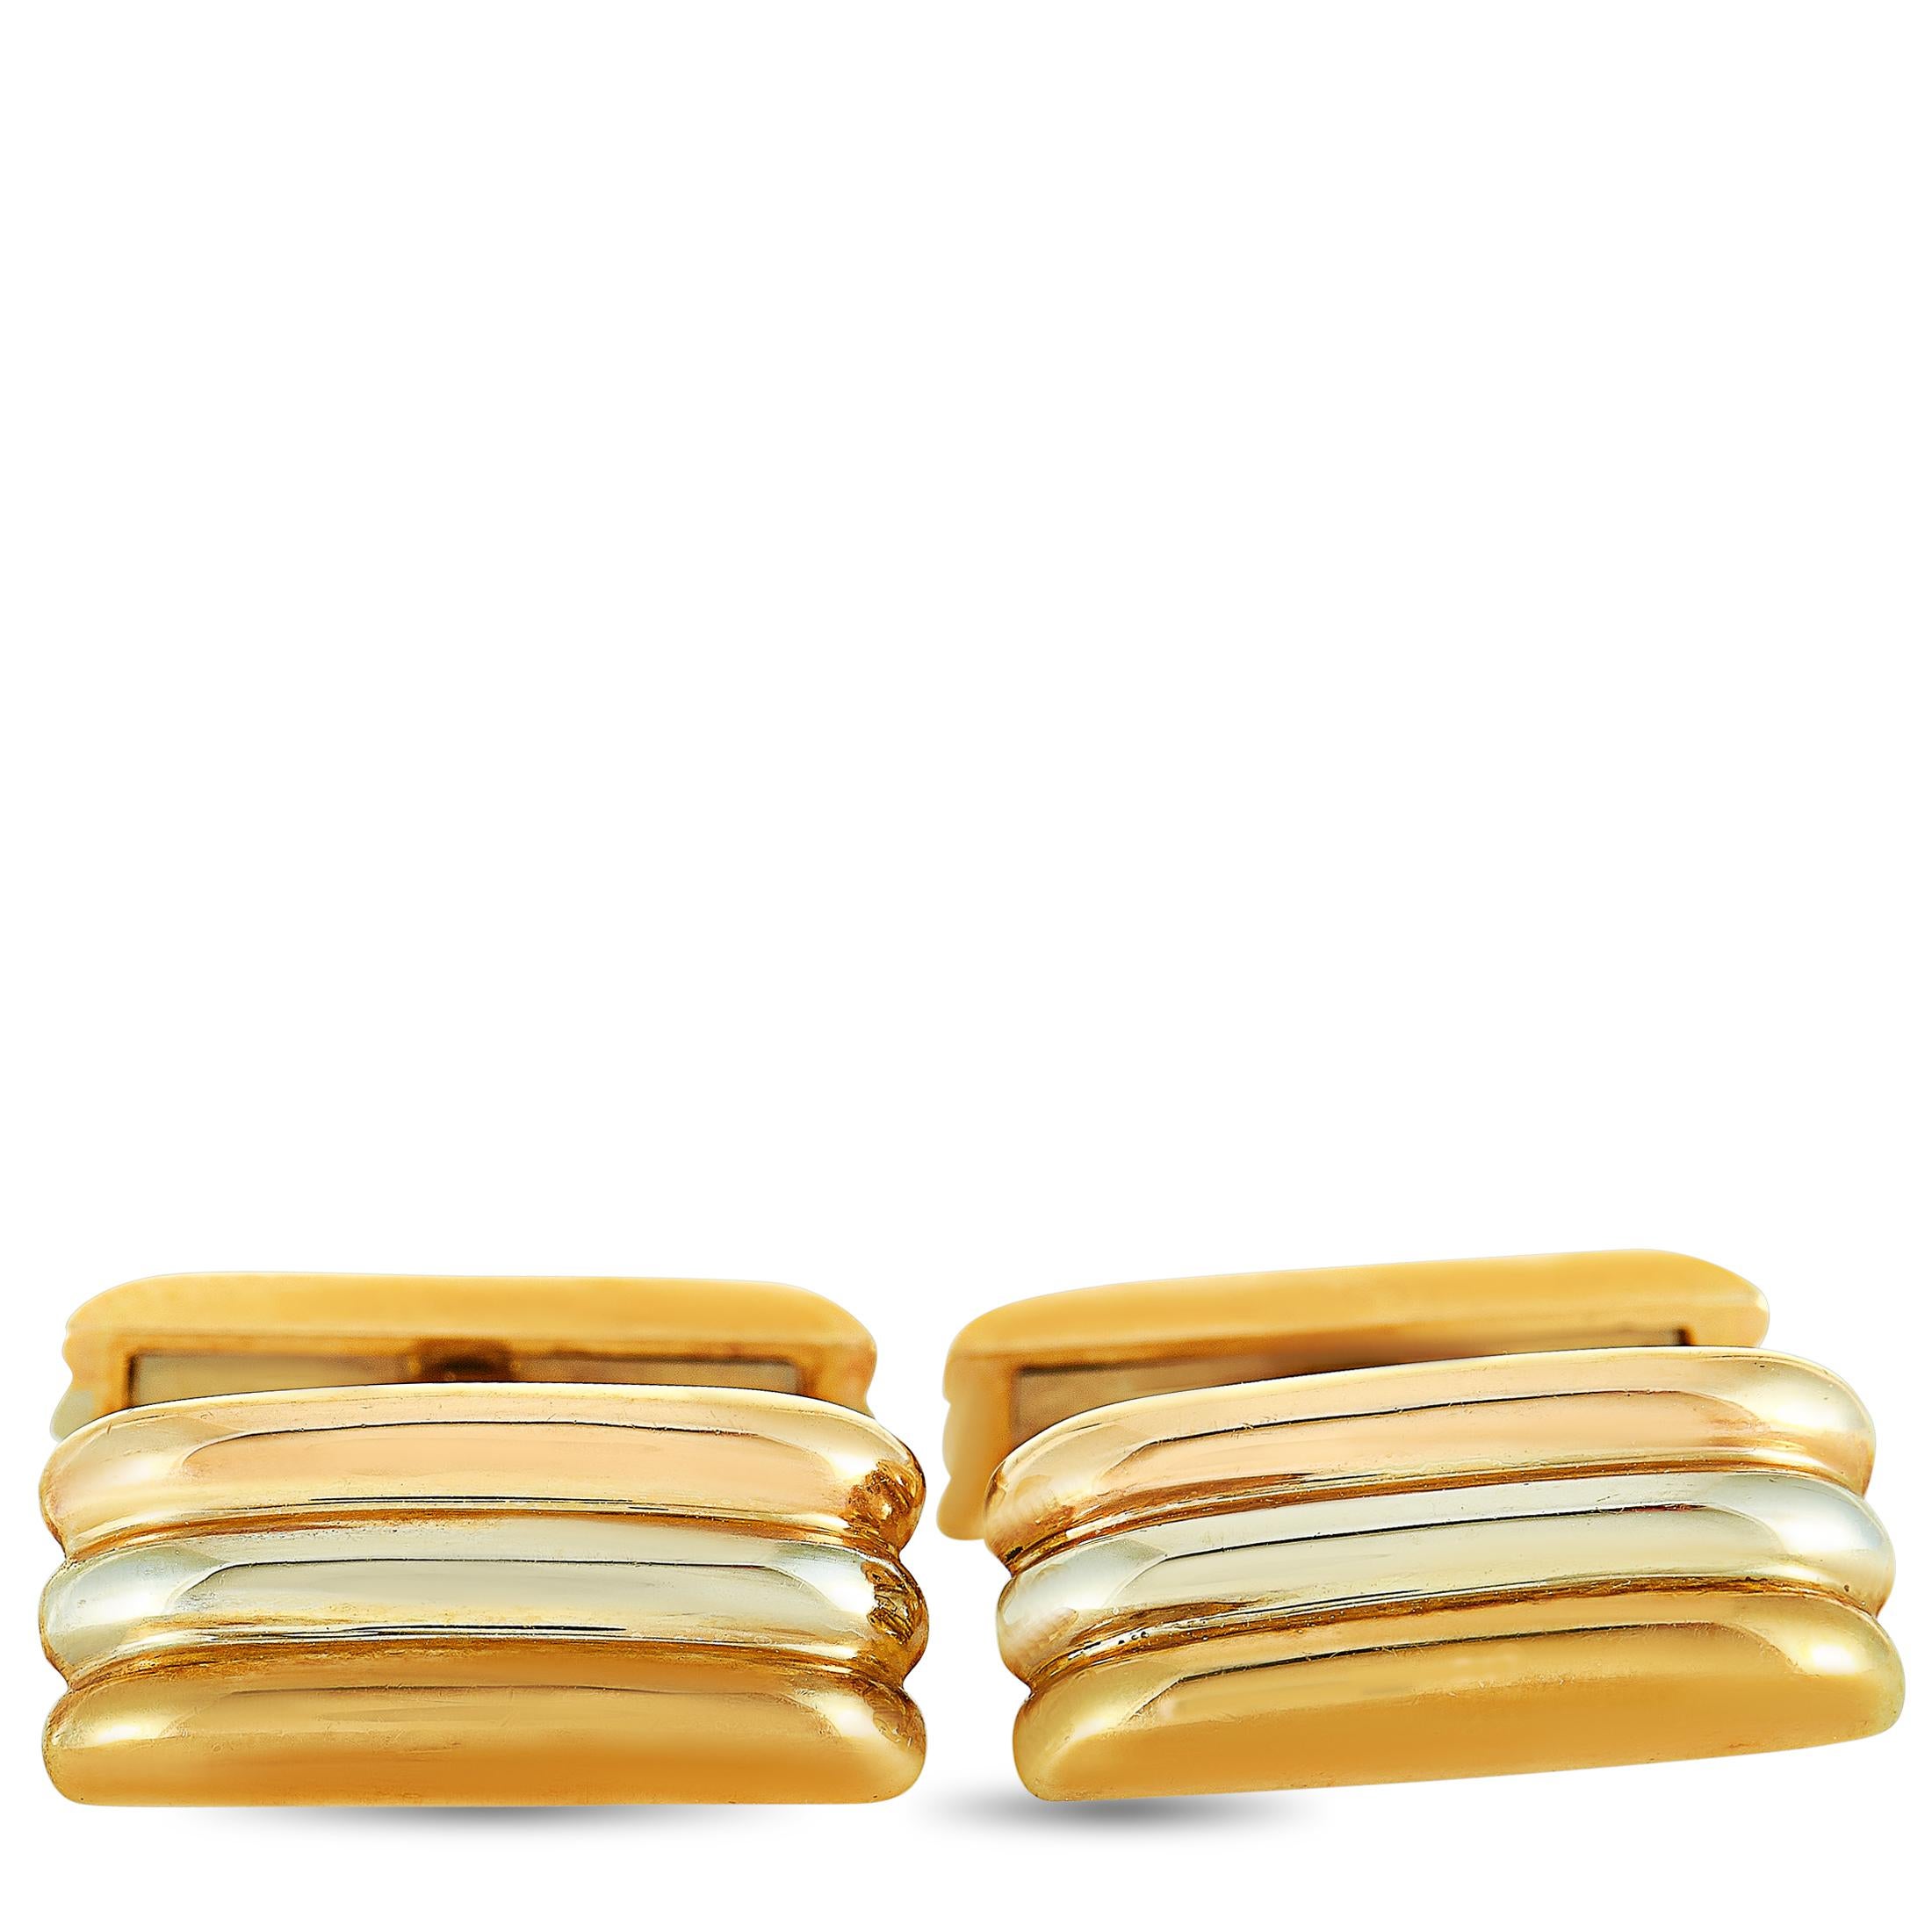 The Cartier “Tricolor” vintage cufflinks are made out of 18K yellow, white and rose gold and each of the two weighs 6.5 grams, measuring 0.62” in length and 0.25” in width.

The cufflinks are offered in estate condition and include the